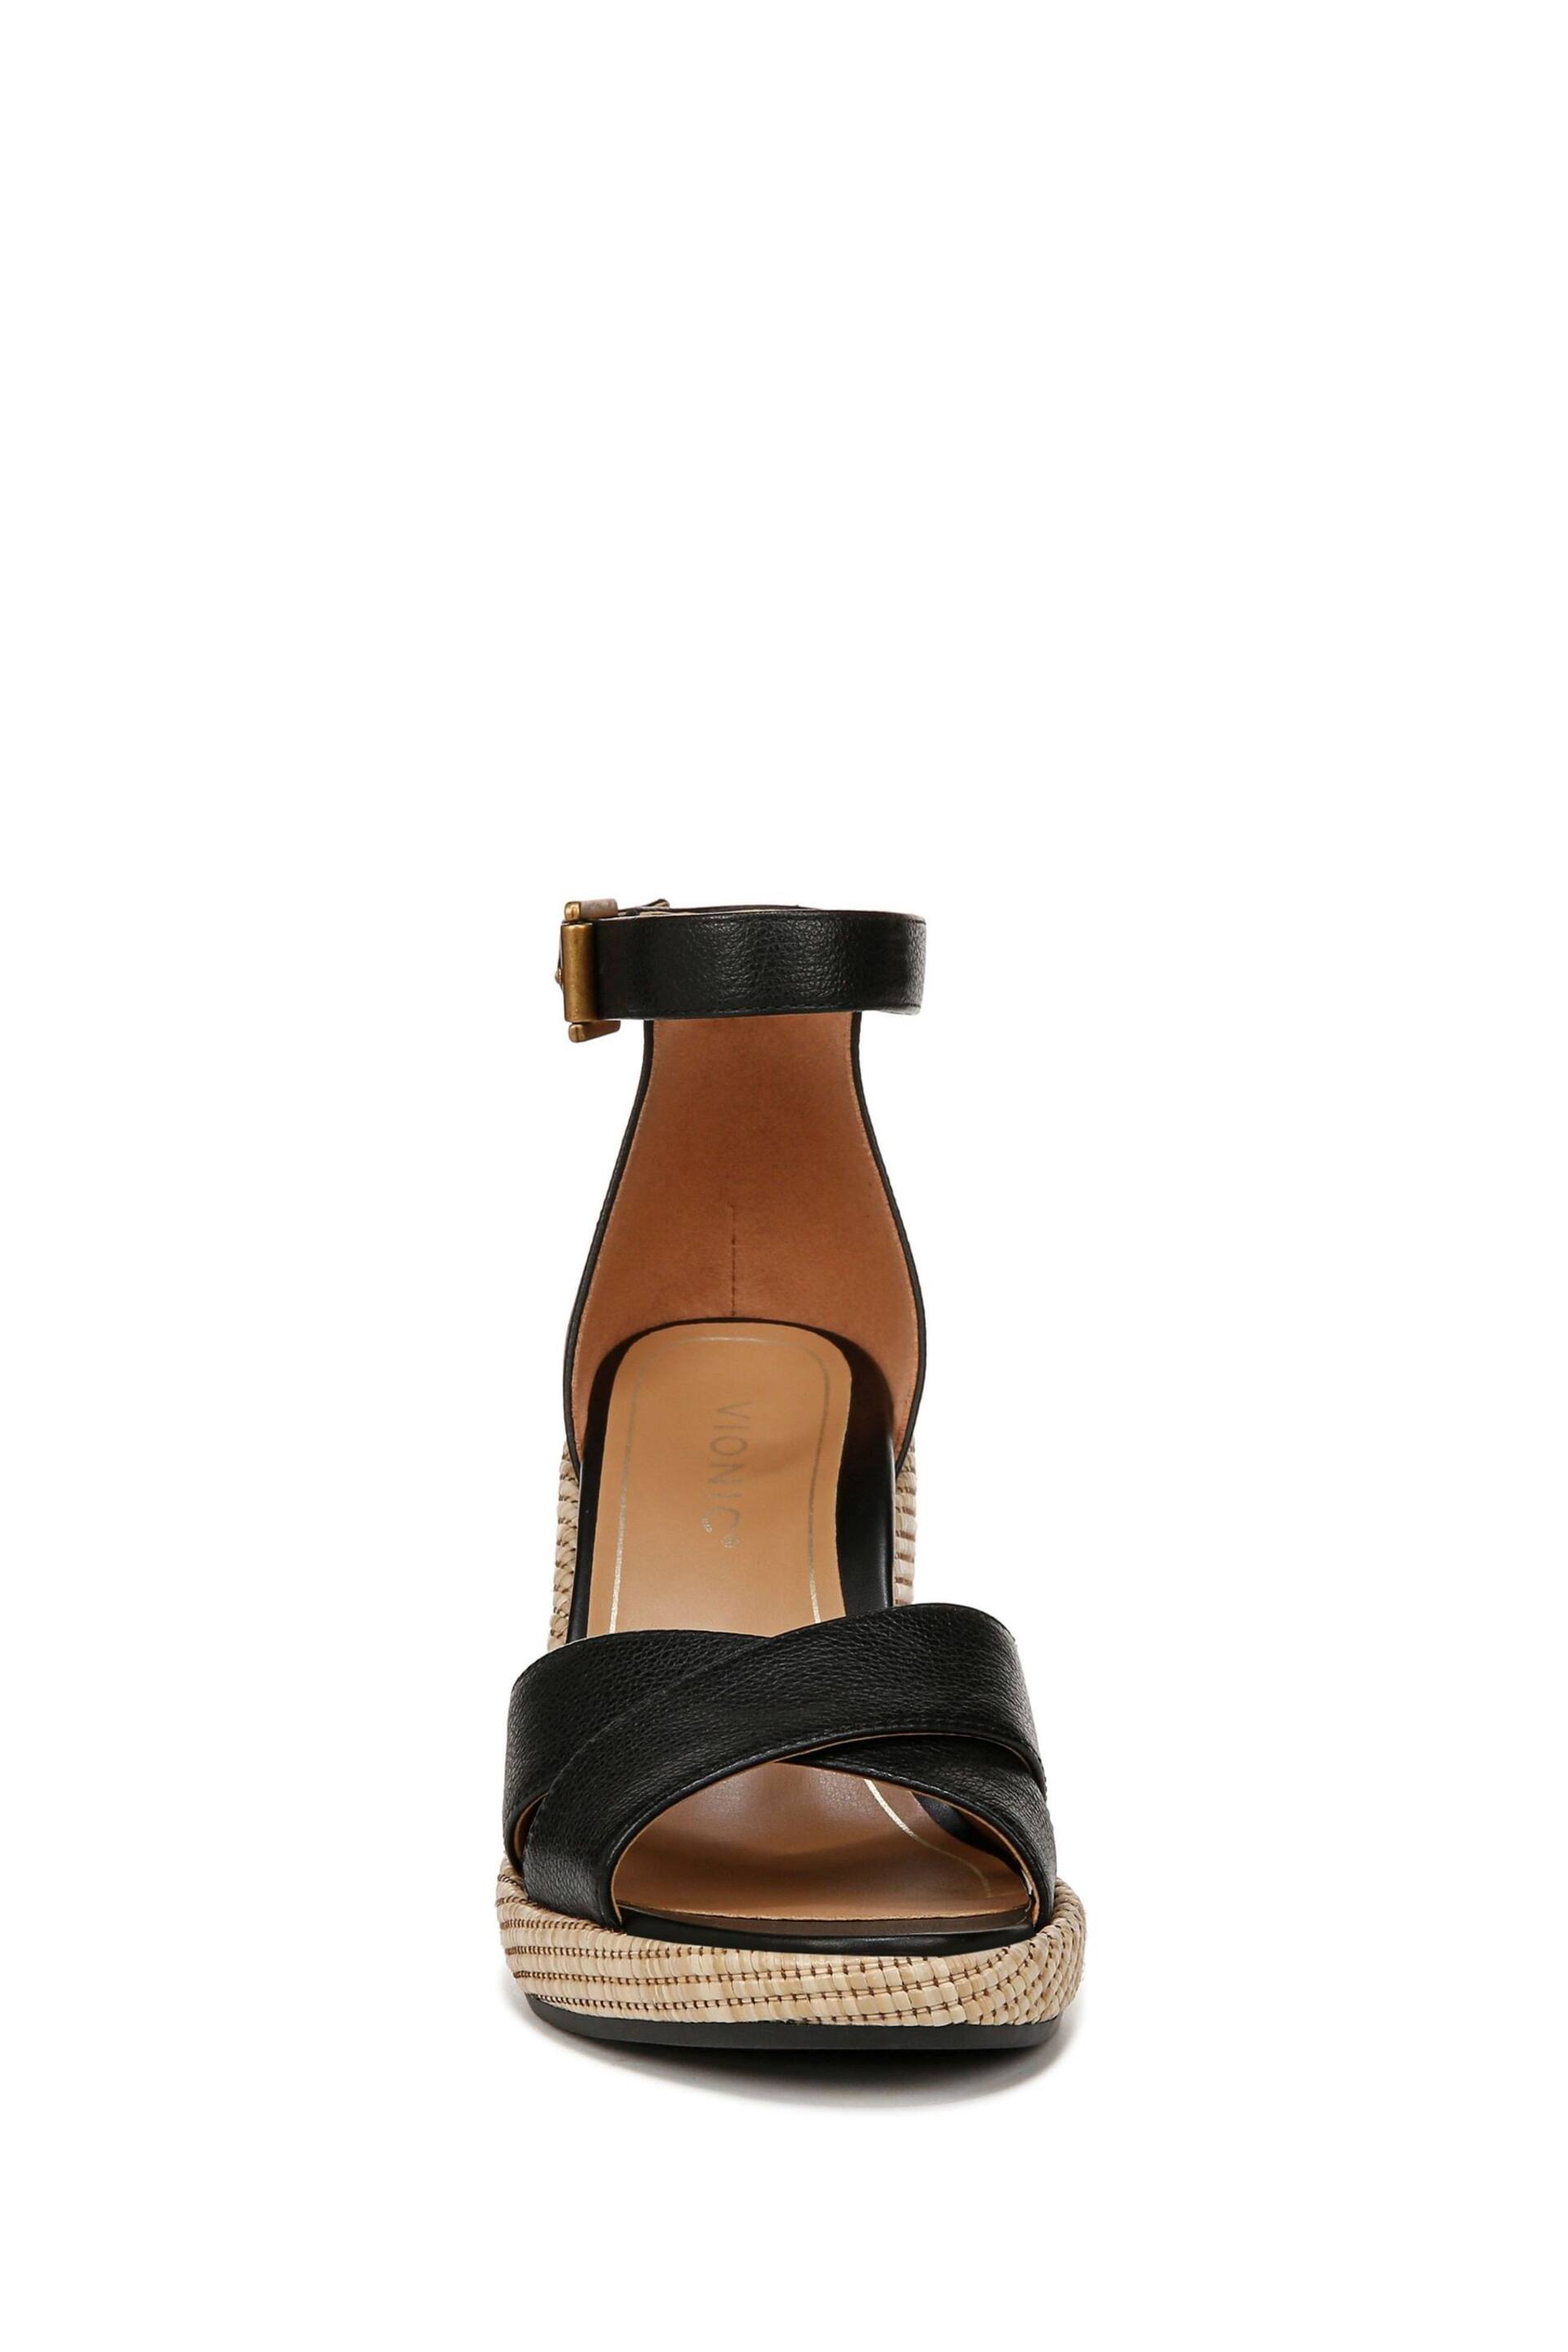 Vionic Marina Ankle Strap Wedge Sandals - Image 4 of 7